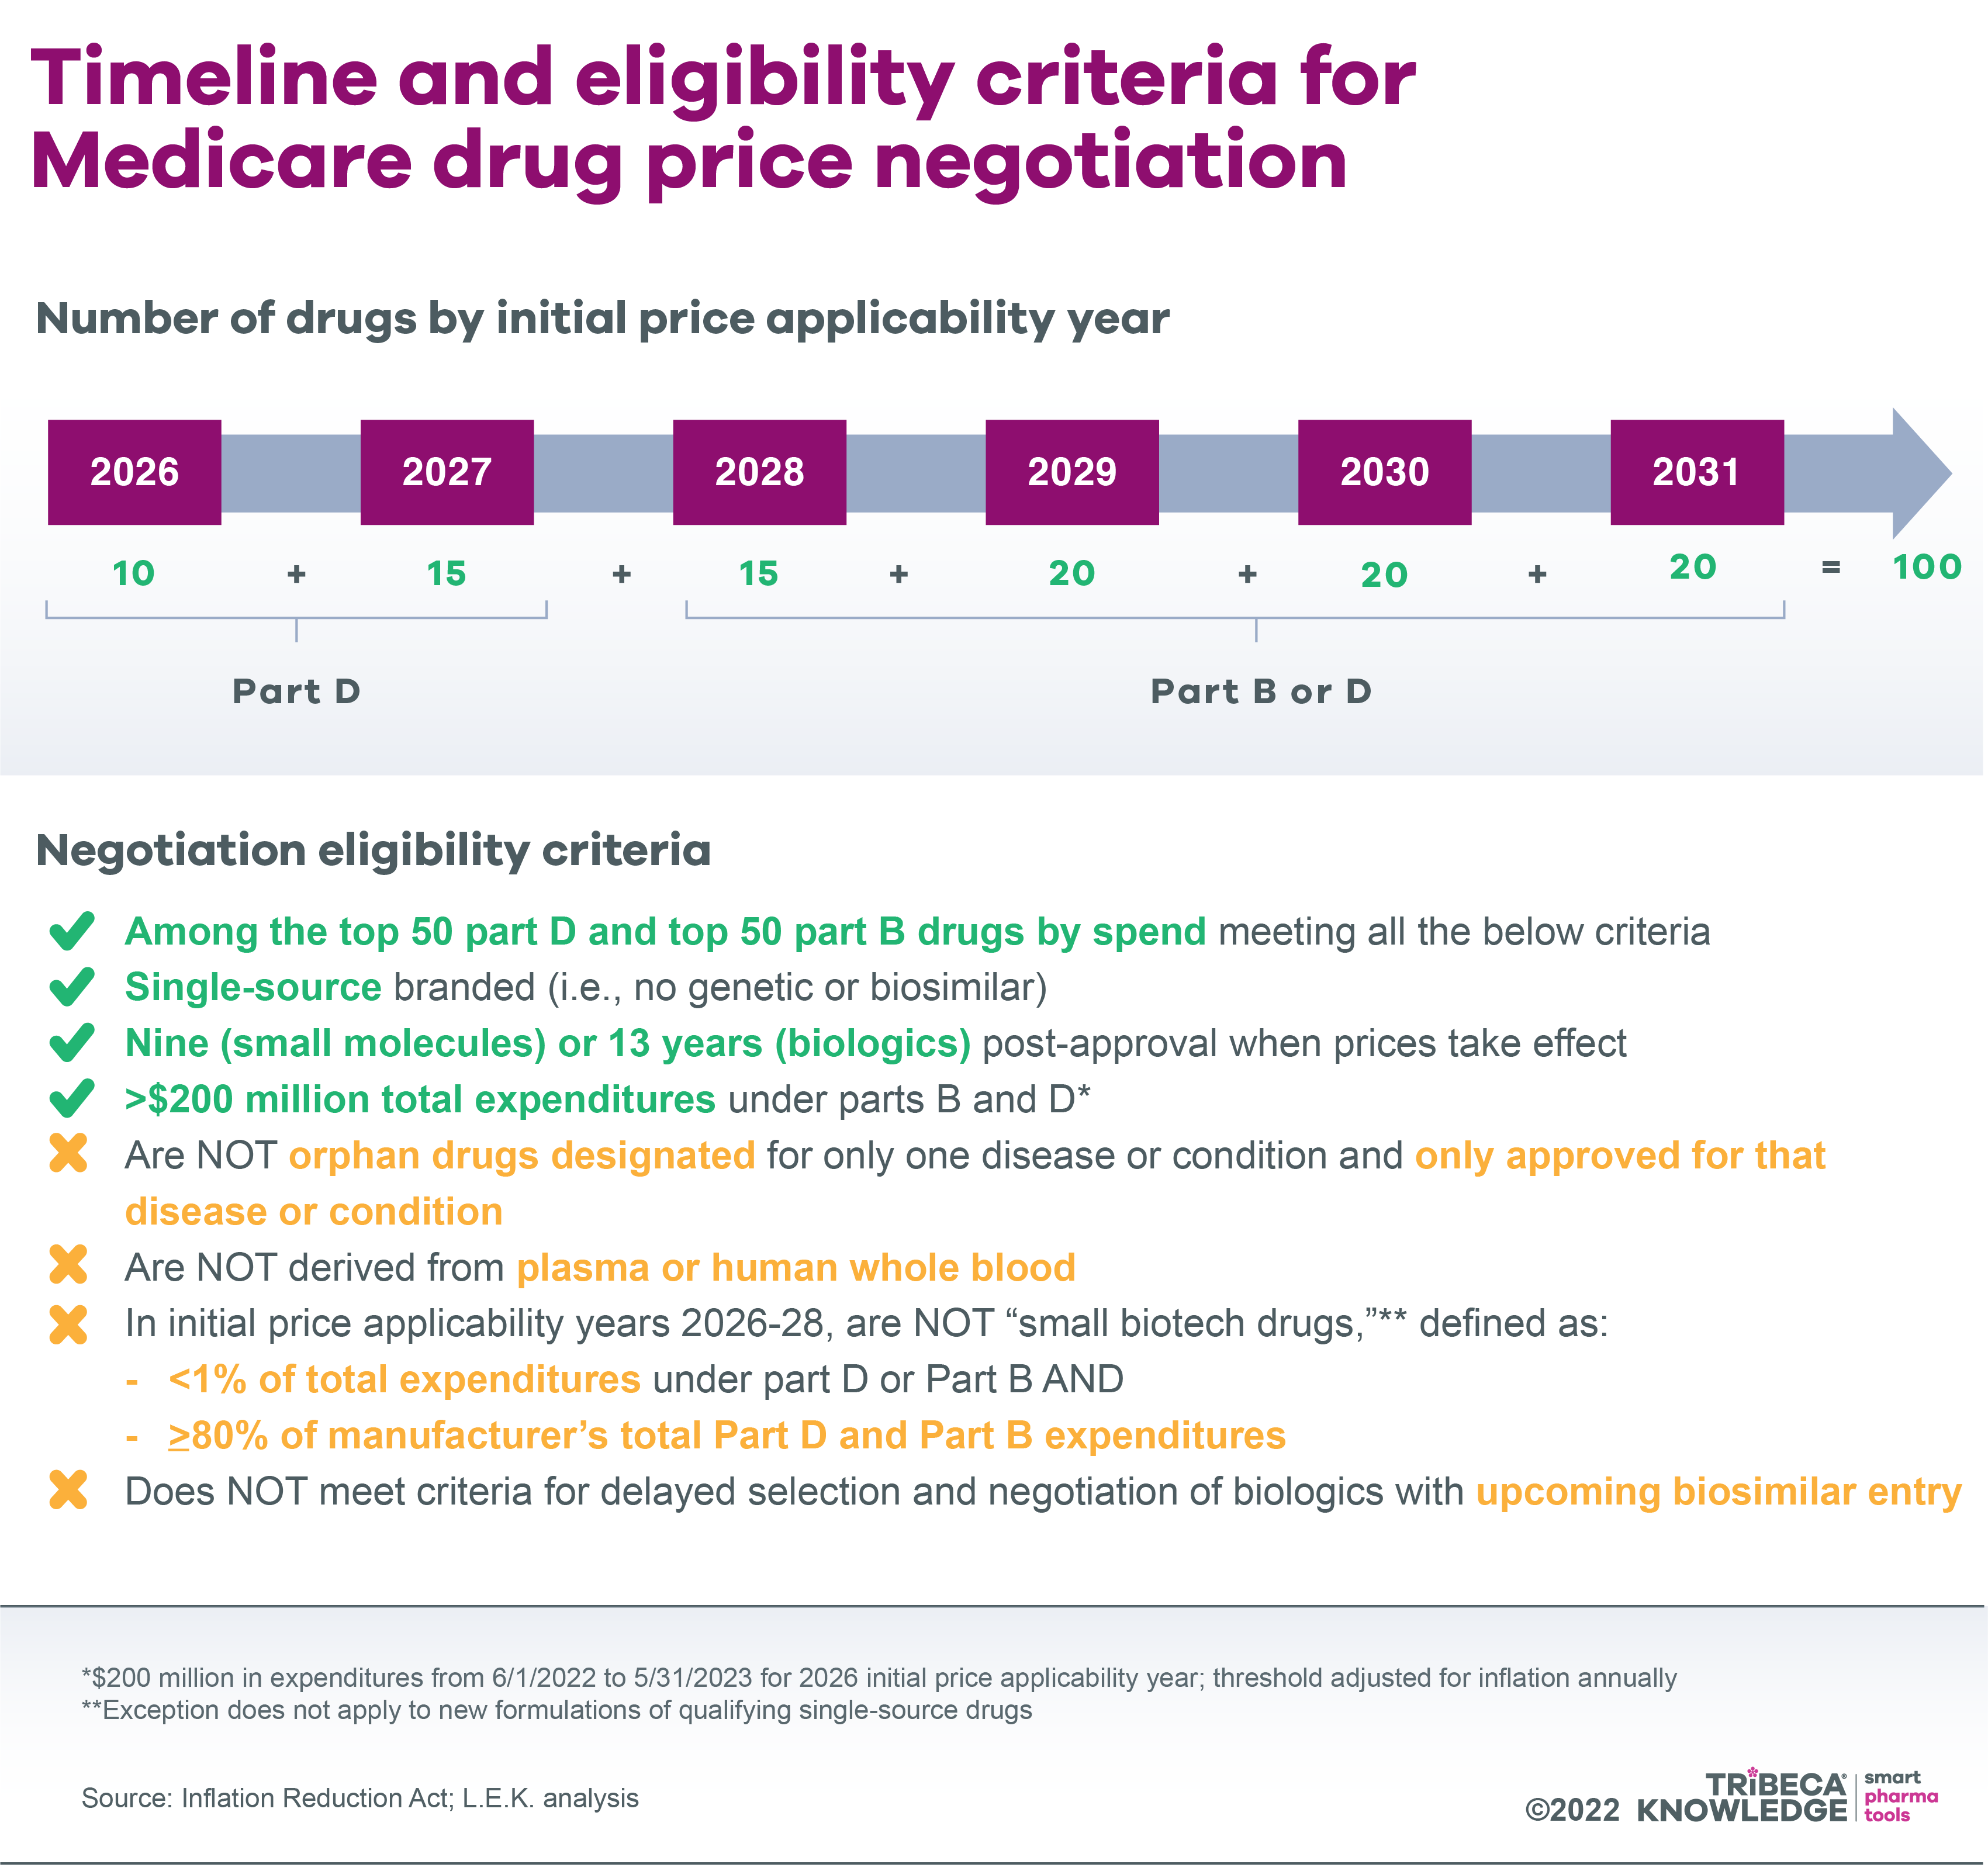 Graphic showing timeline and eligibility criteria for Medicare drug price negotiation.